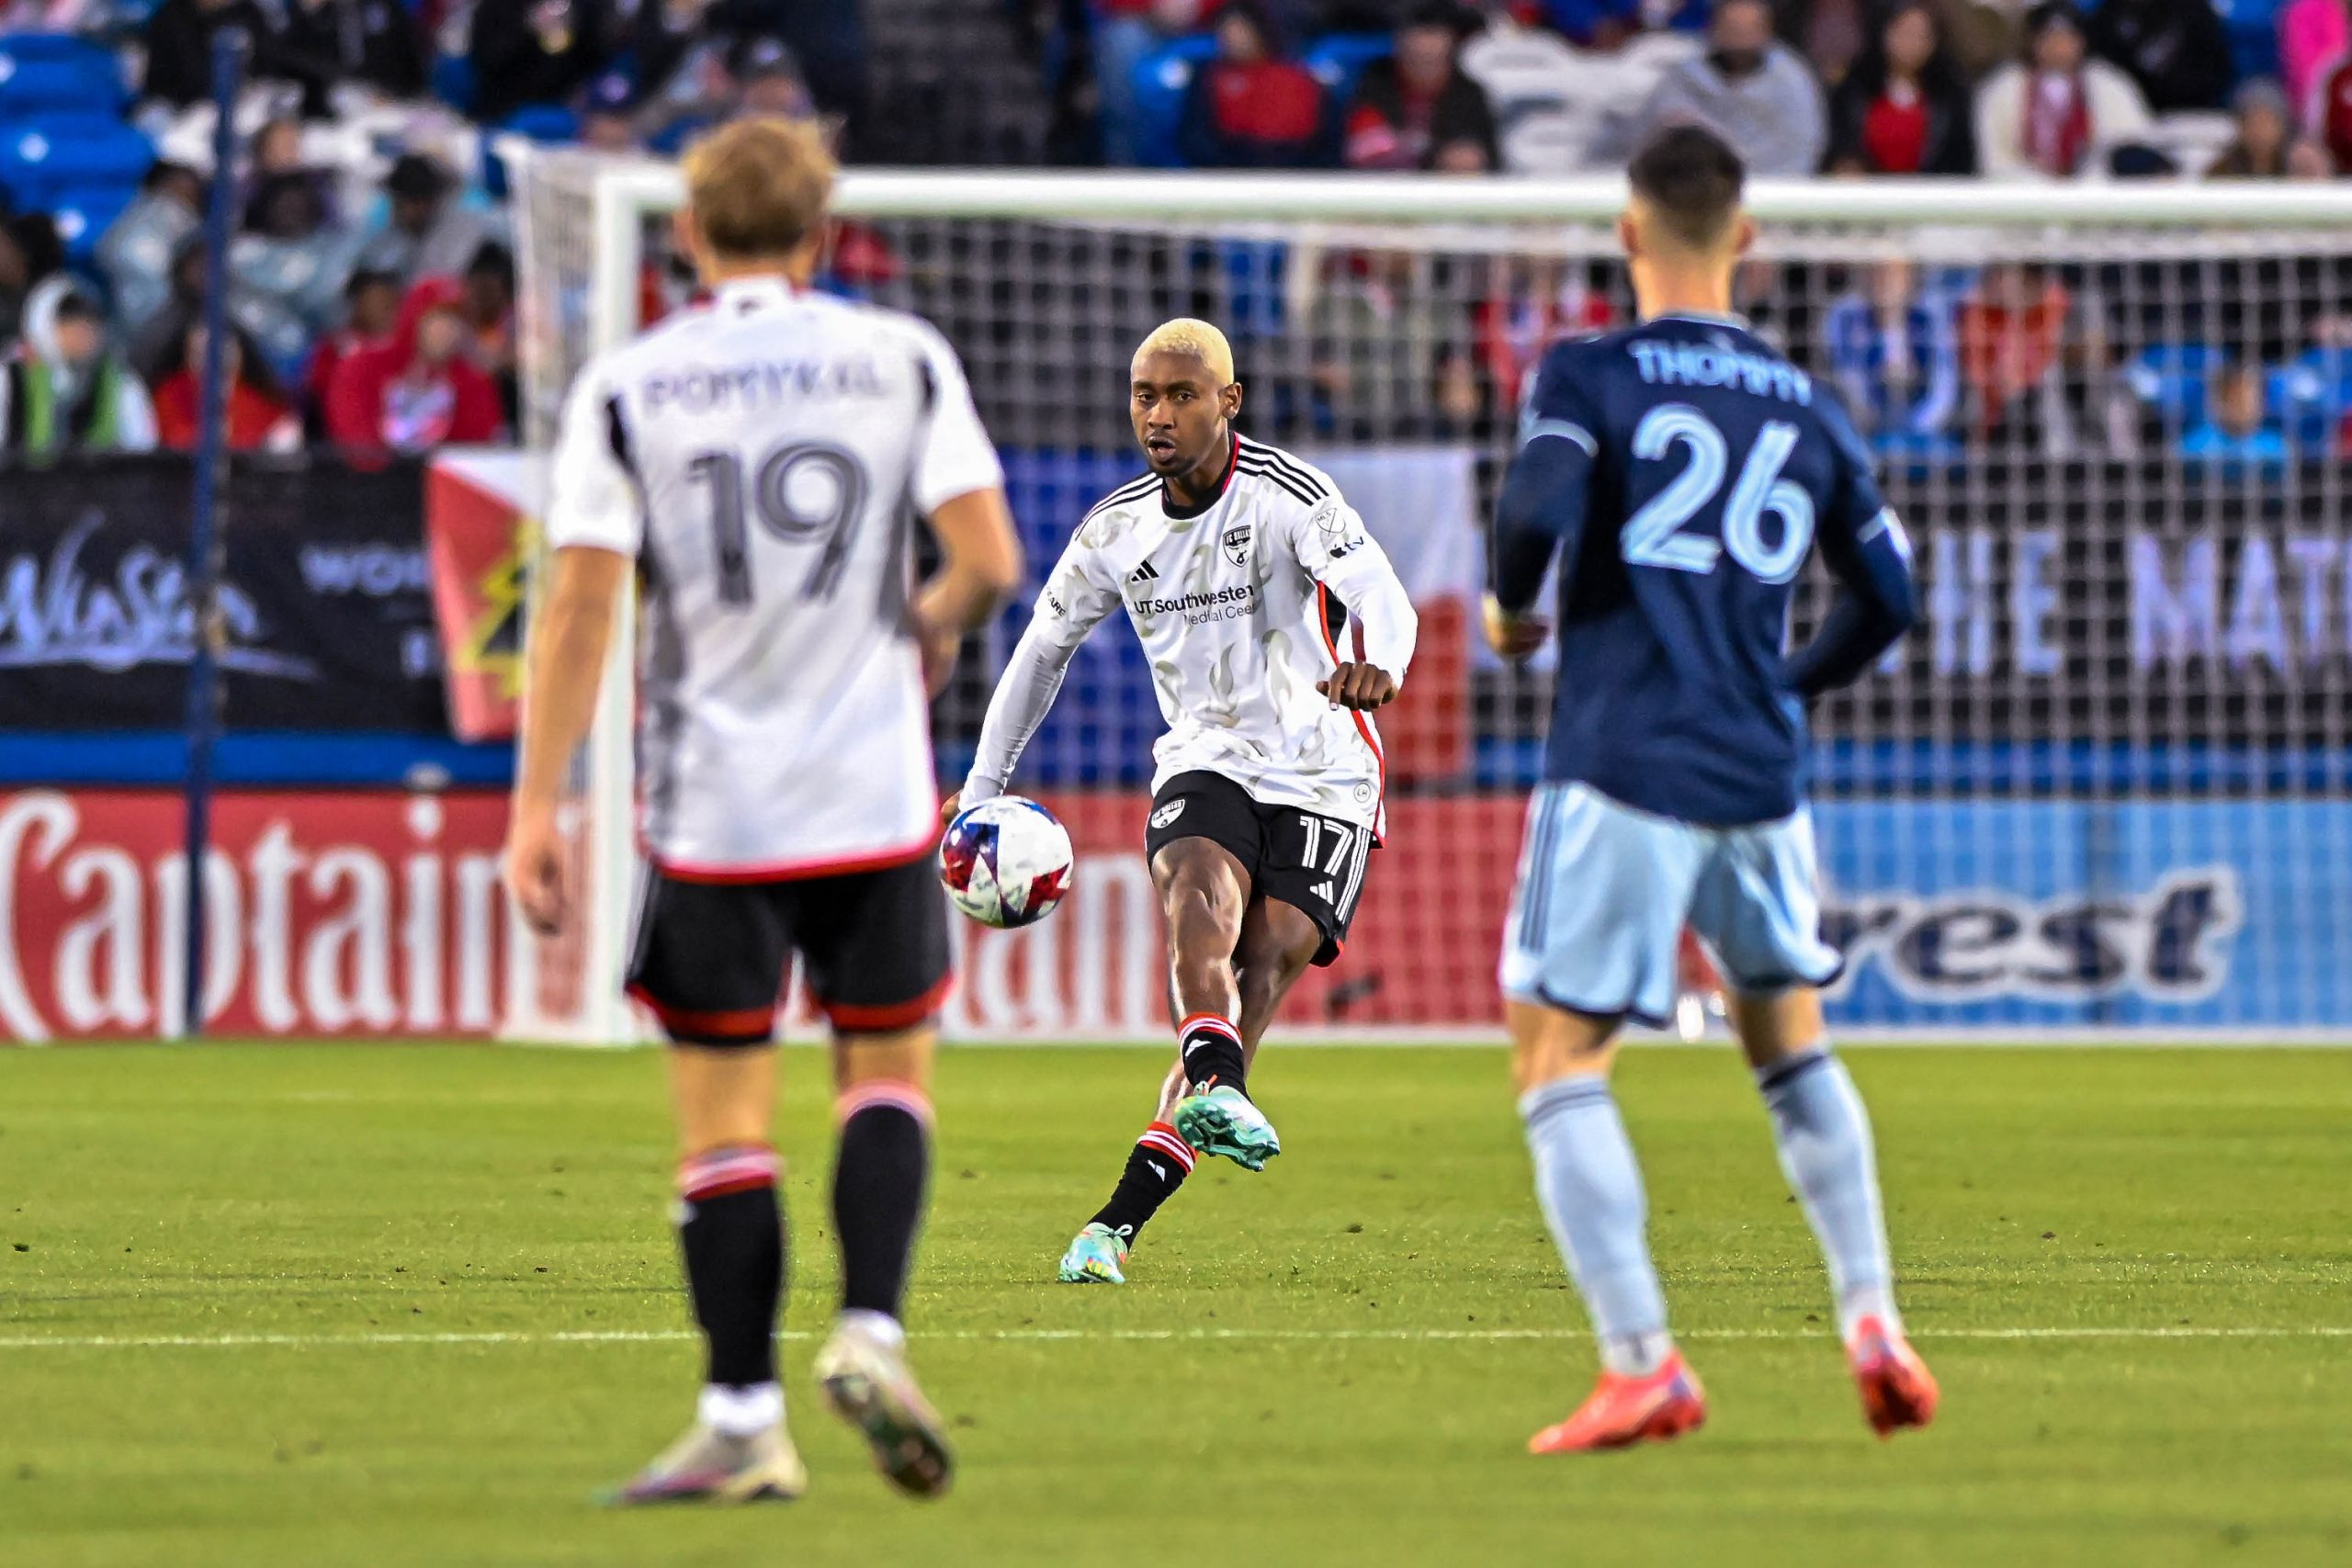 Nkosi Tafari passes the ball up field in the MLS match against Sporting KC on Saturday, March 18, 2023, at Toyota Stadium. (Daniel McCullough, 3rd Degree)